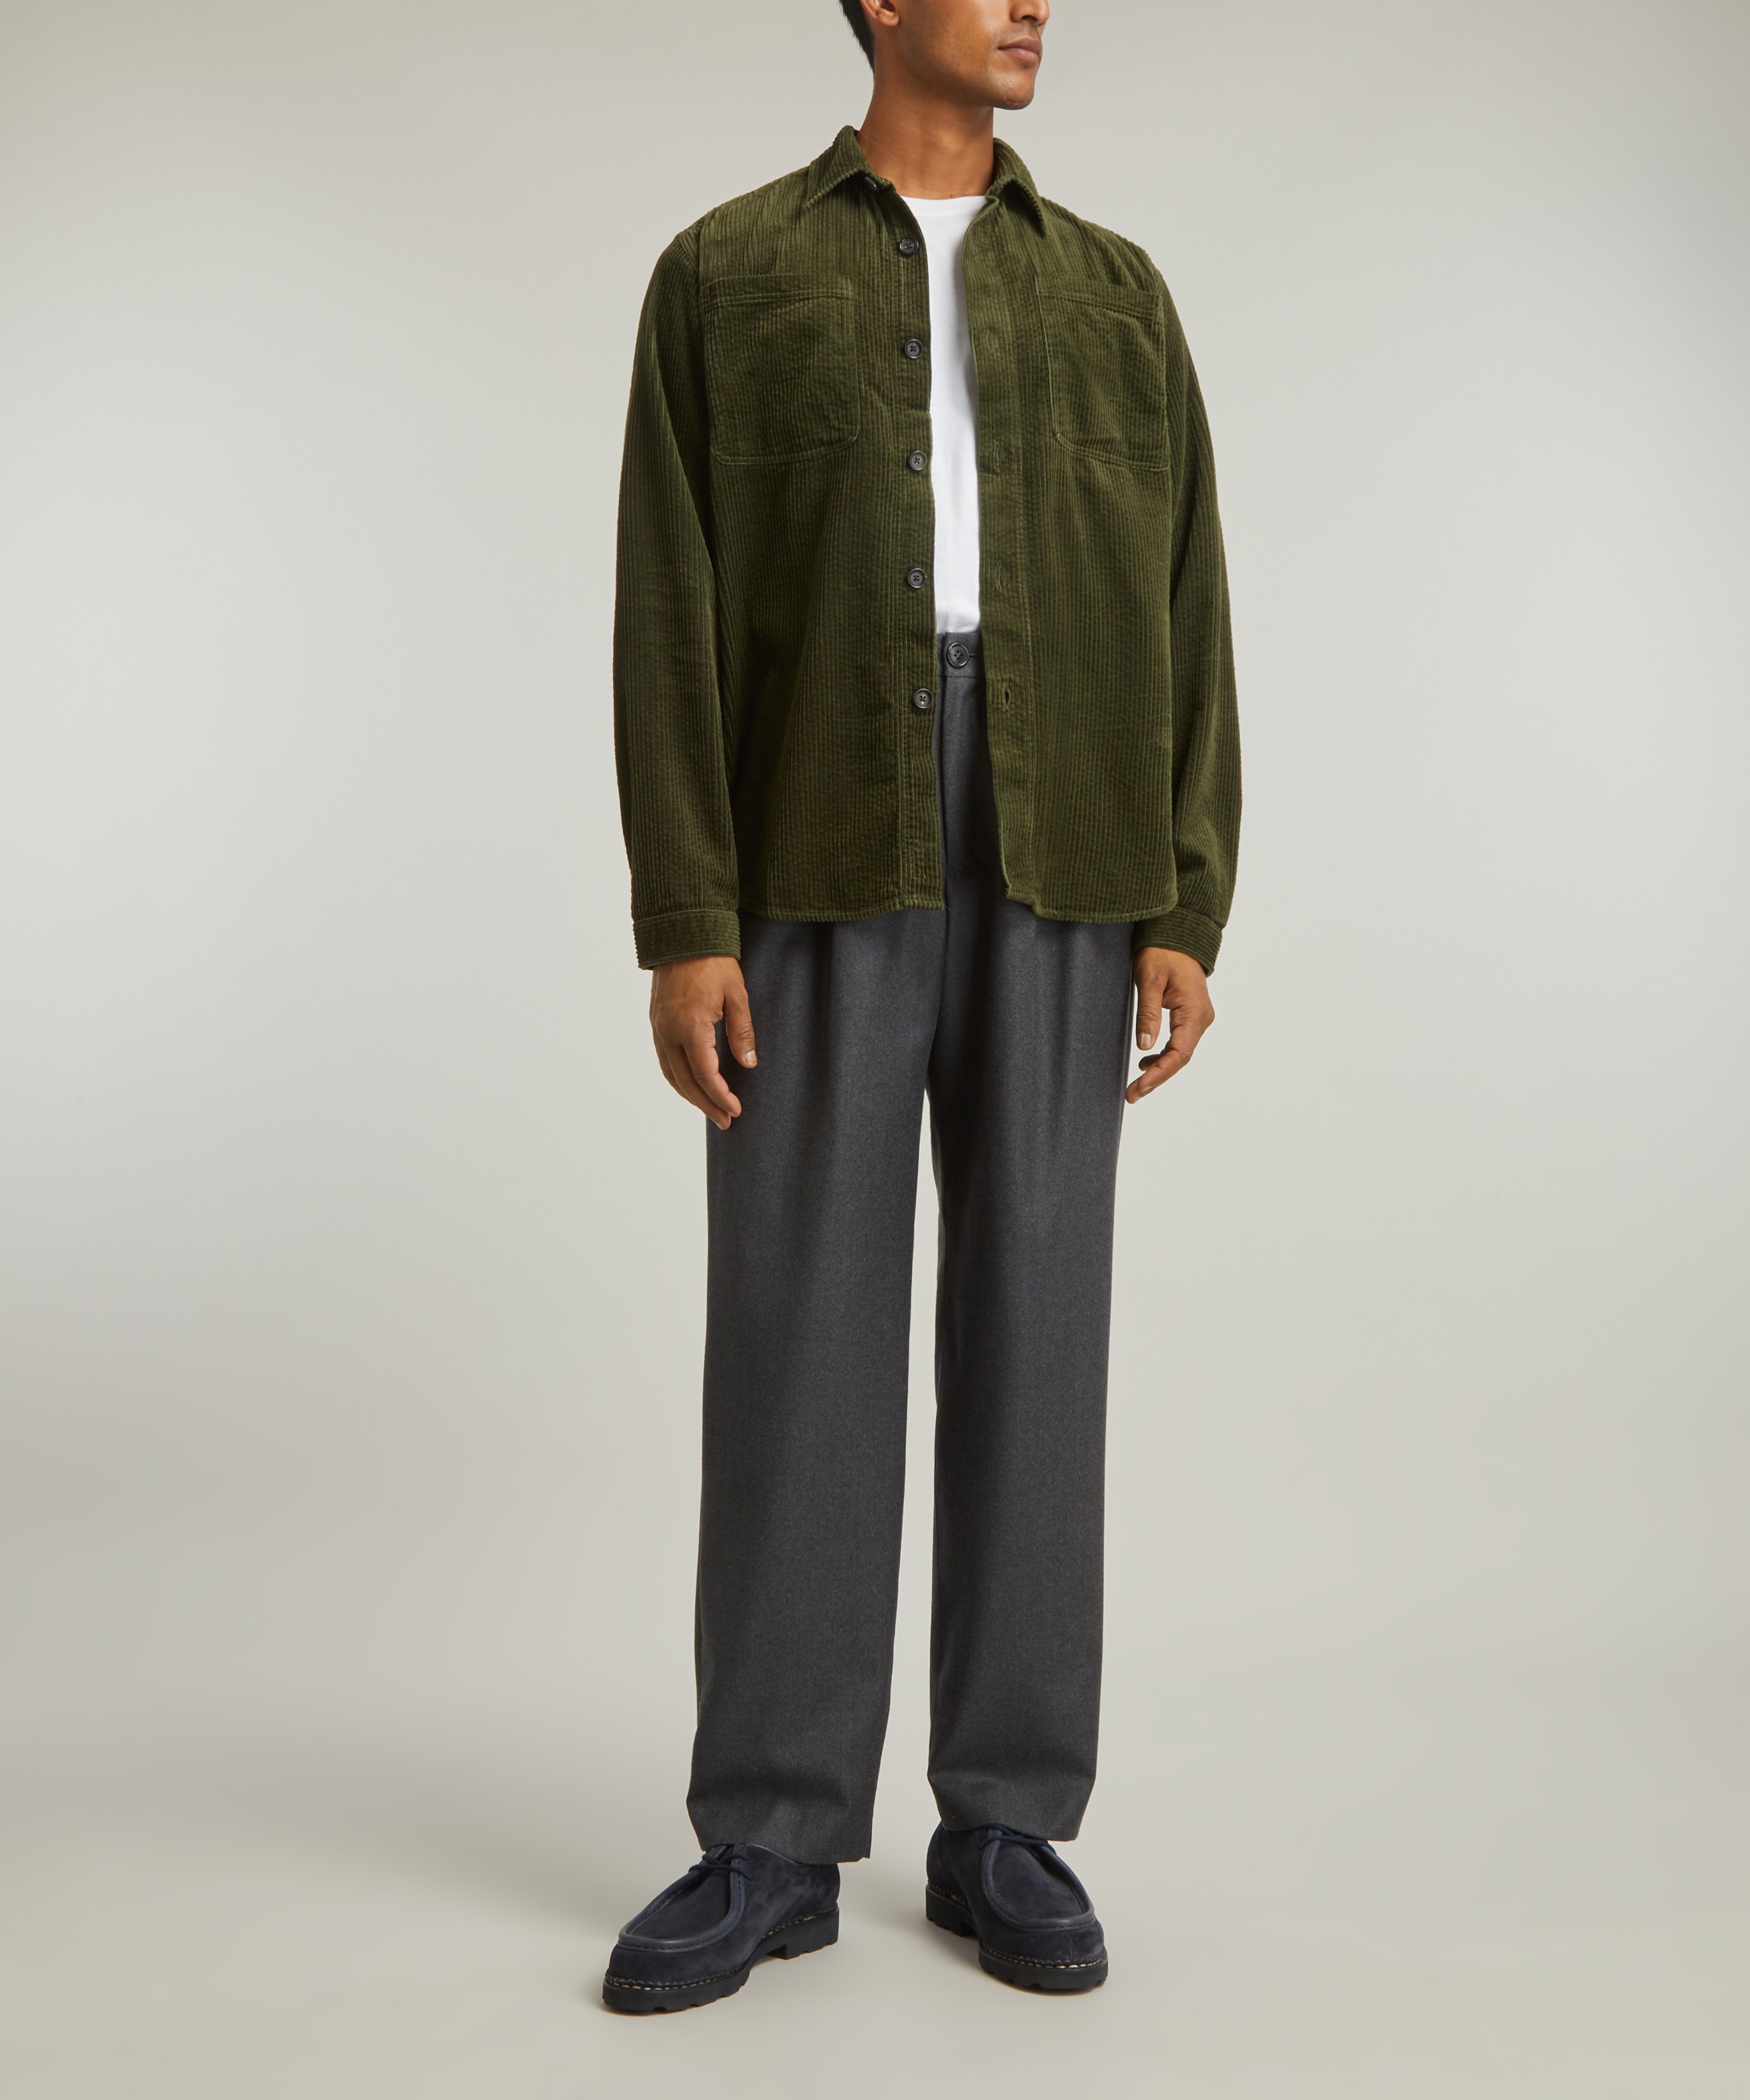 Oliver Spencer Treviscoe Green Cord Shirt | Liberty